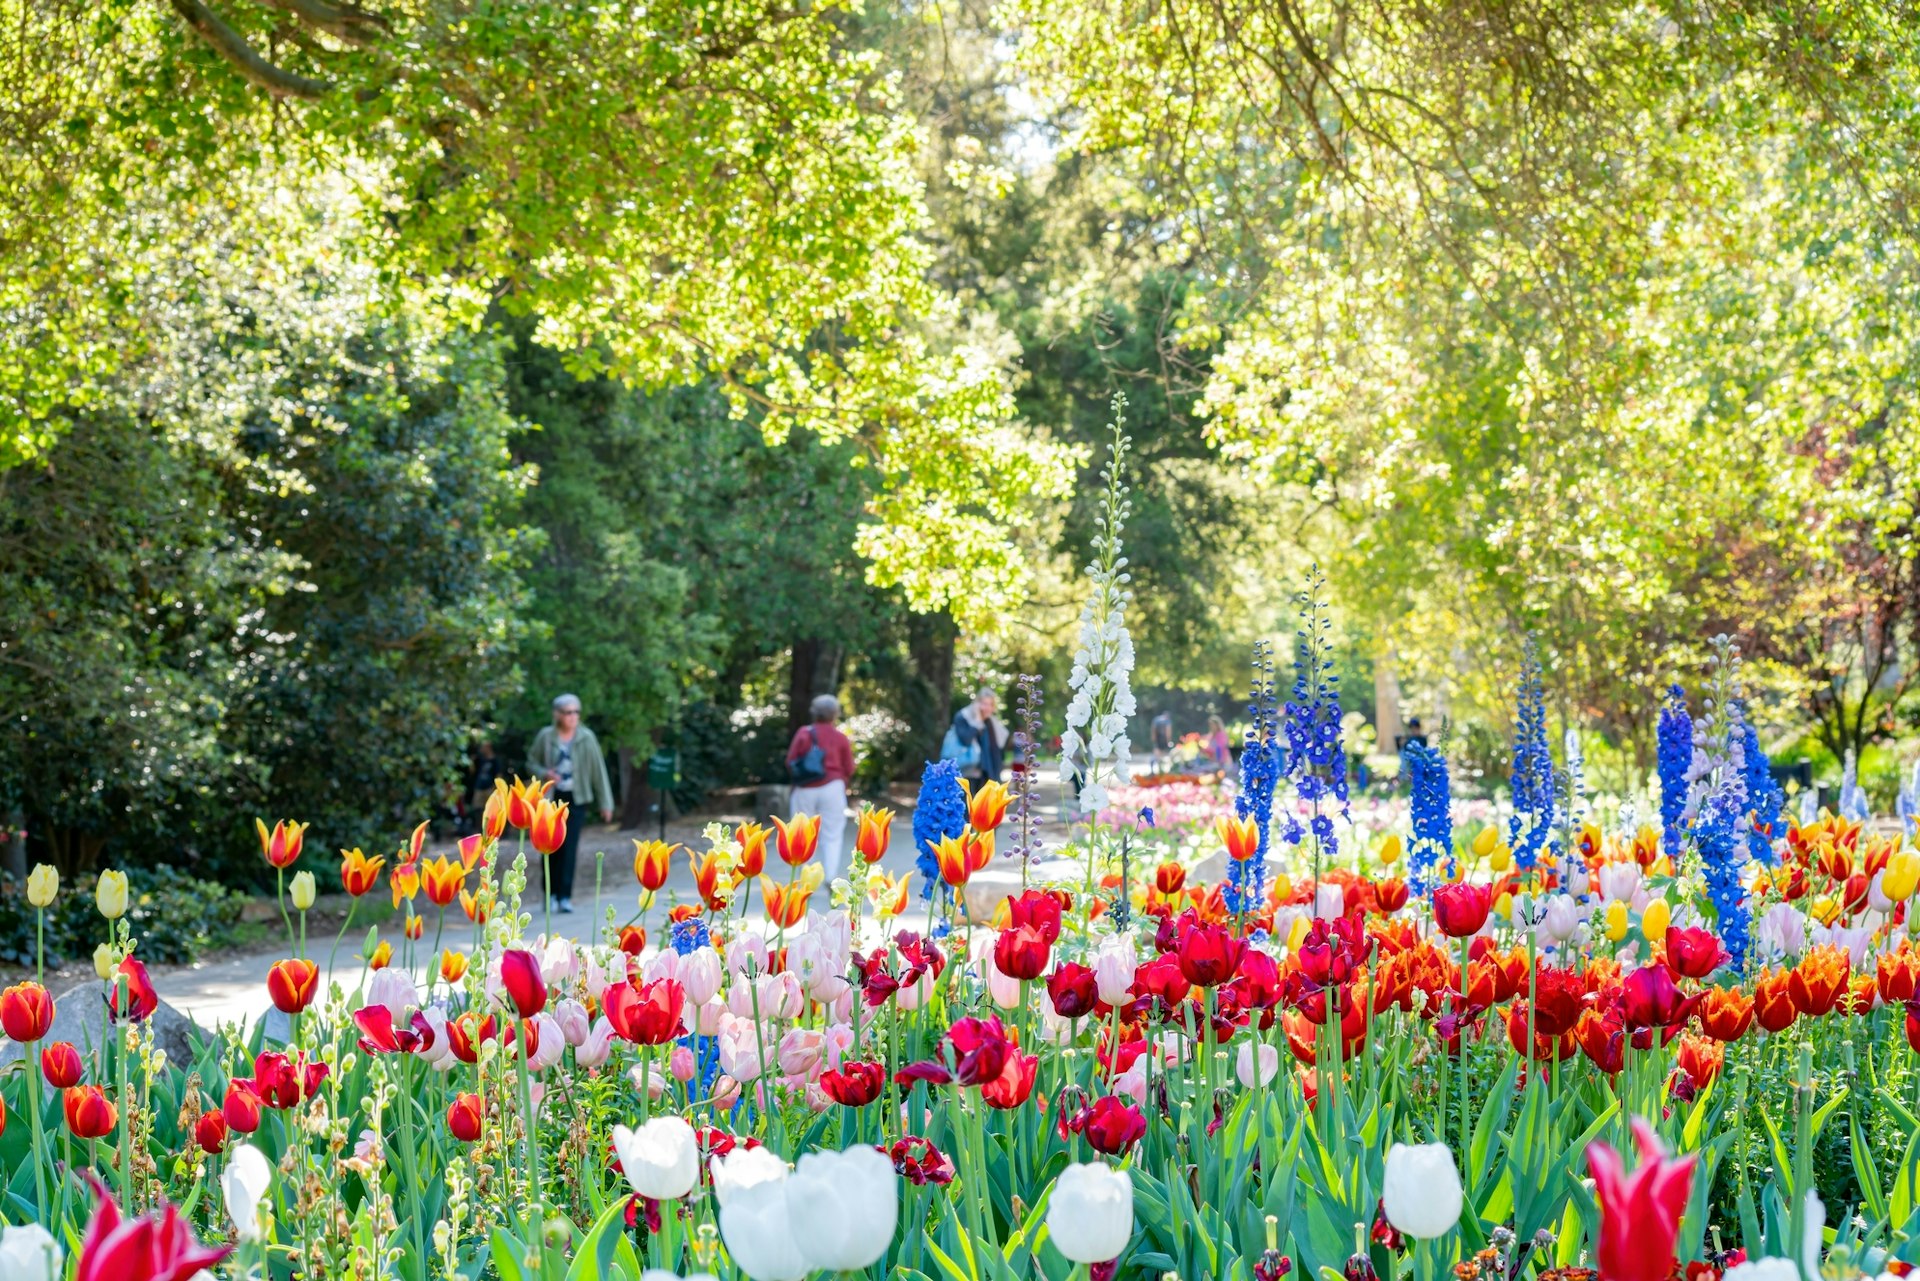 Tulips in bloom in a flower bed bordering a path through a garden